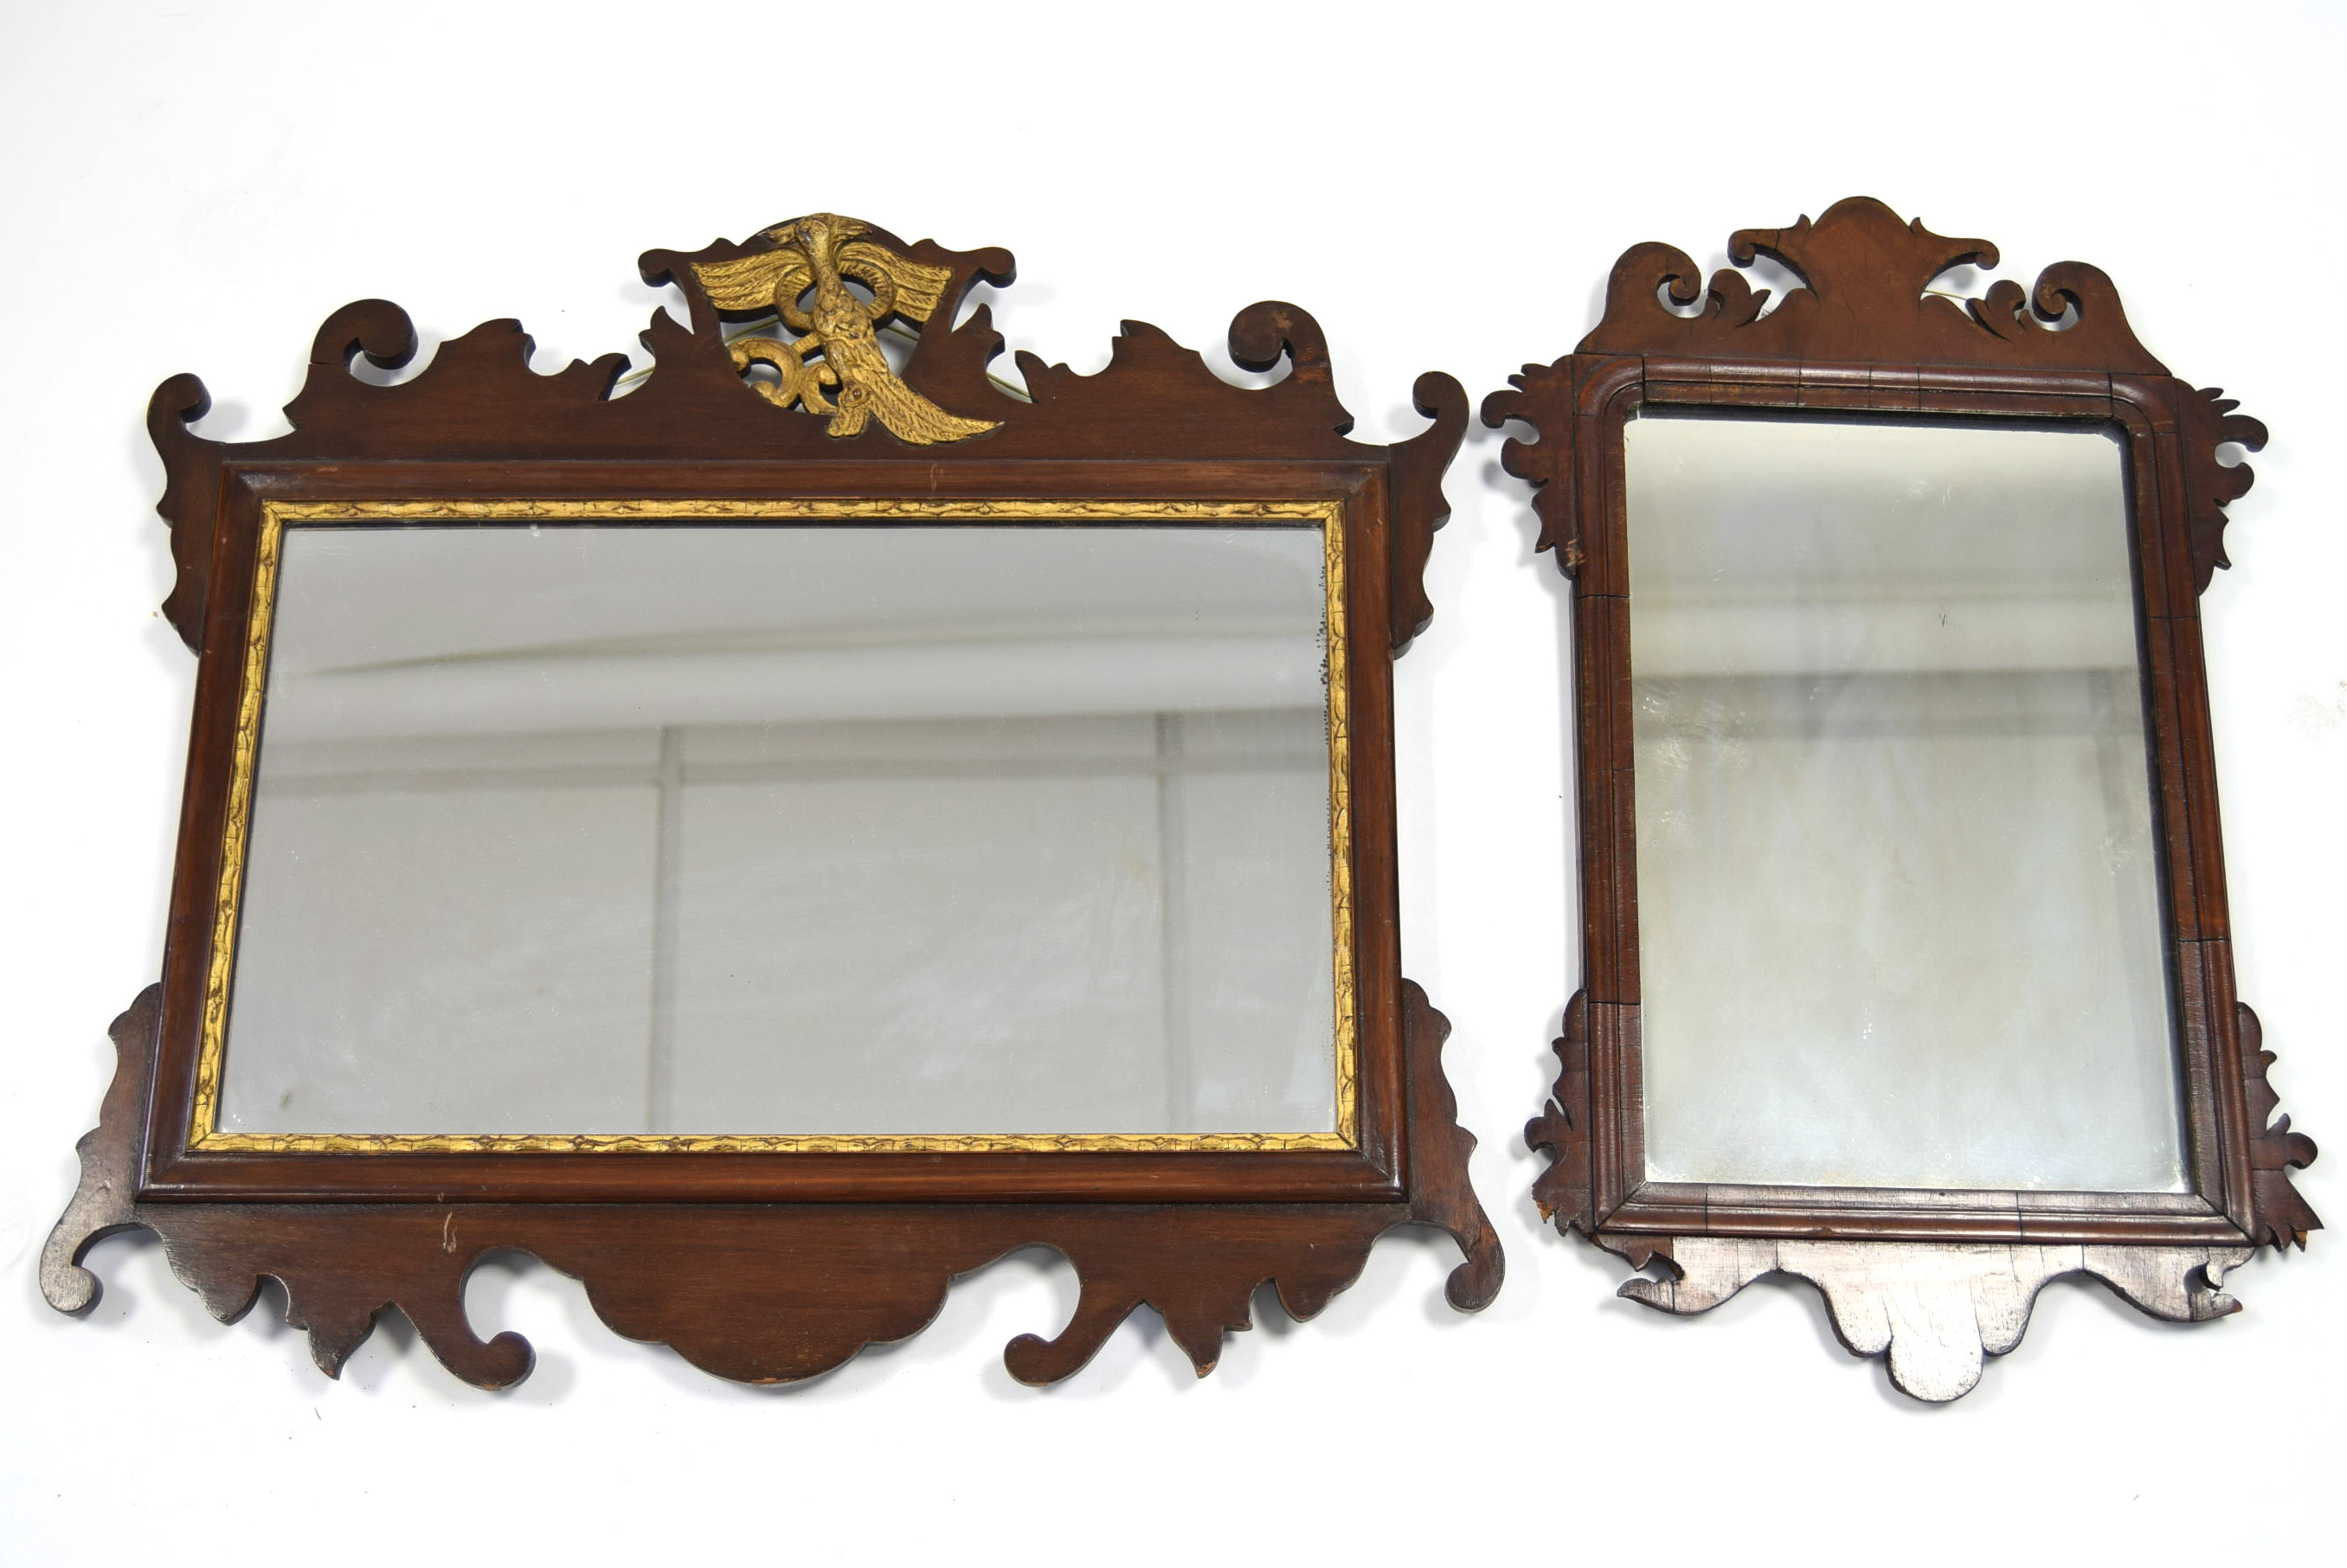 An 18th century-style rectangular wall mirror in mahogany fret-carved frame, 22½” x 20½”; & a